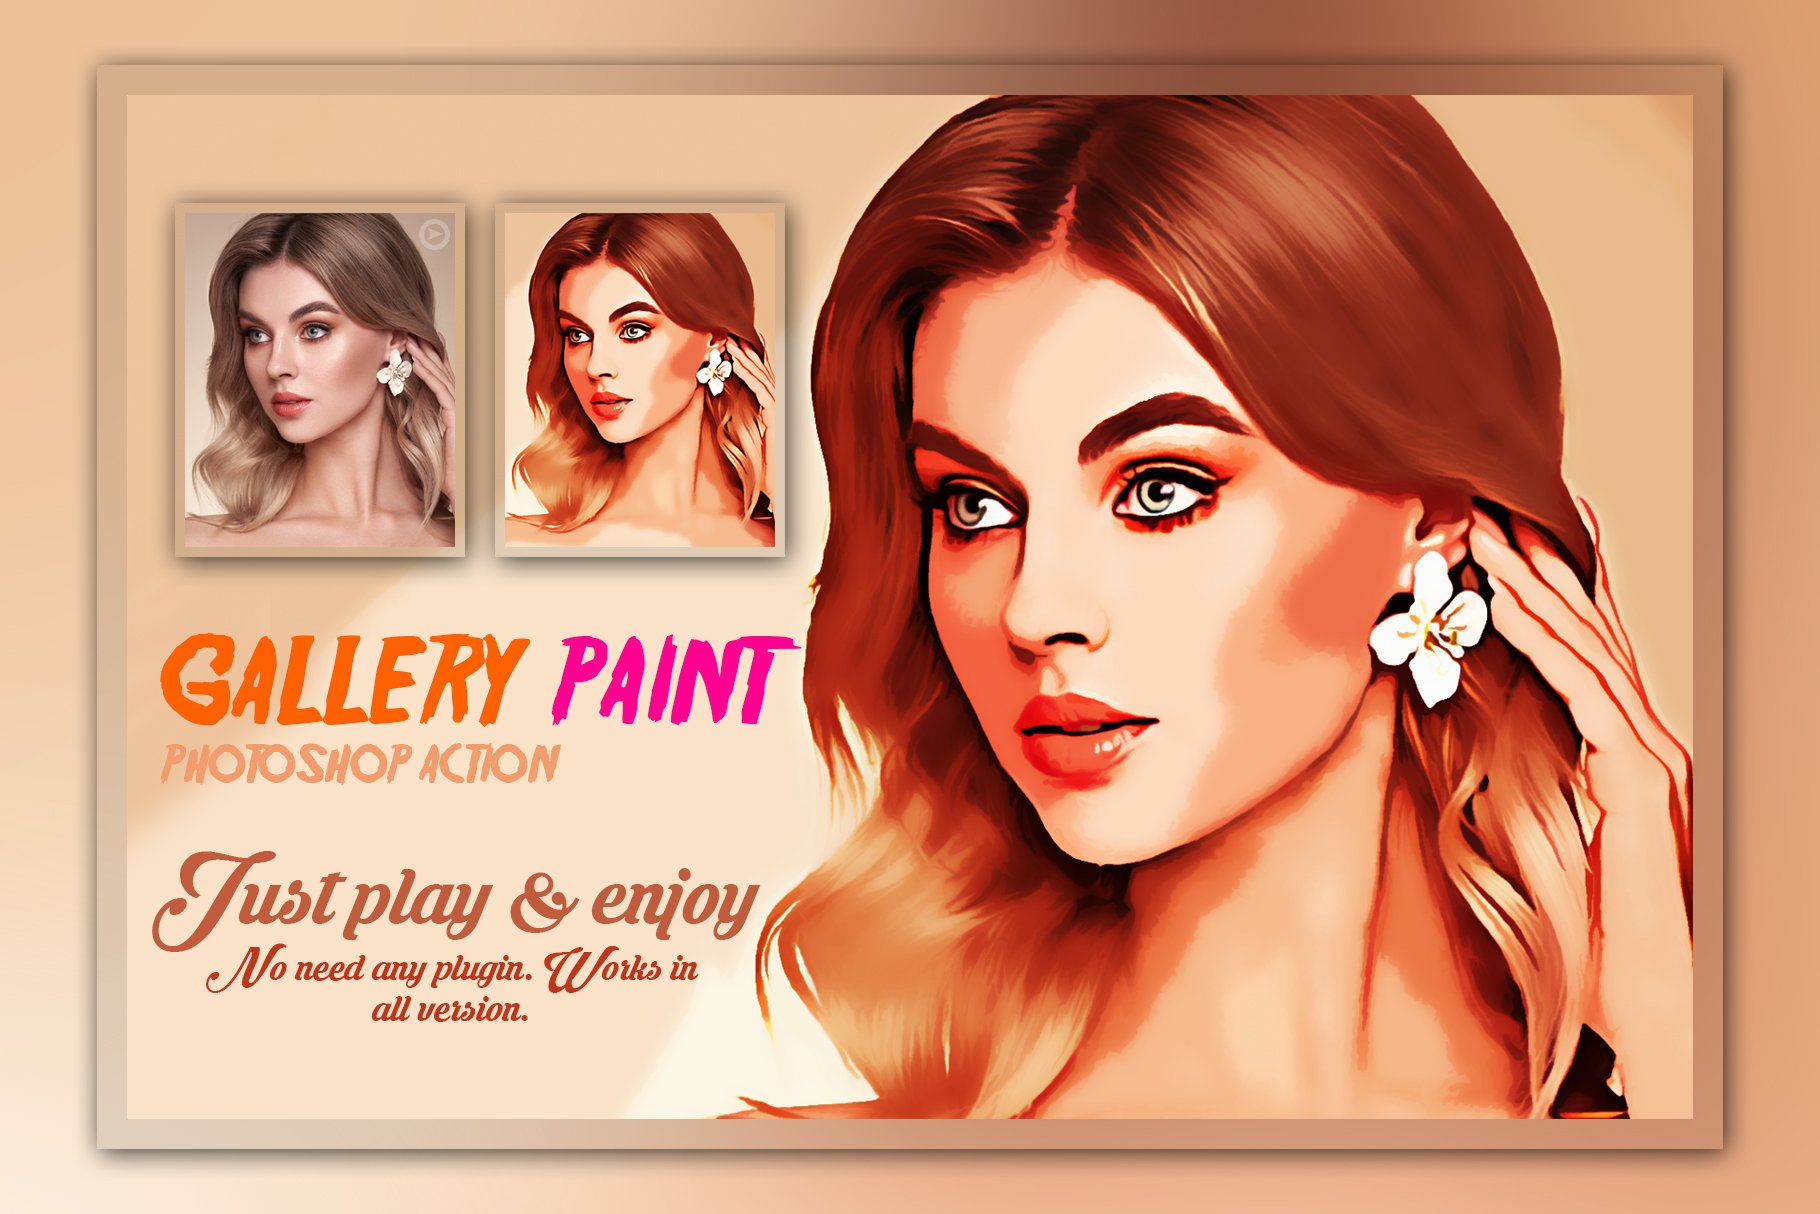 Gallery Painting Photoshop Actioncover image.